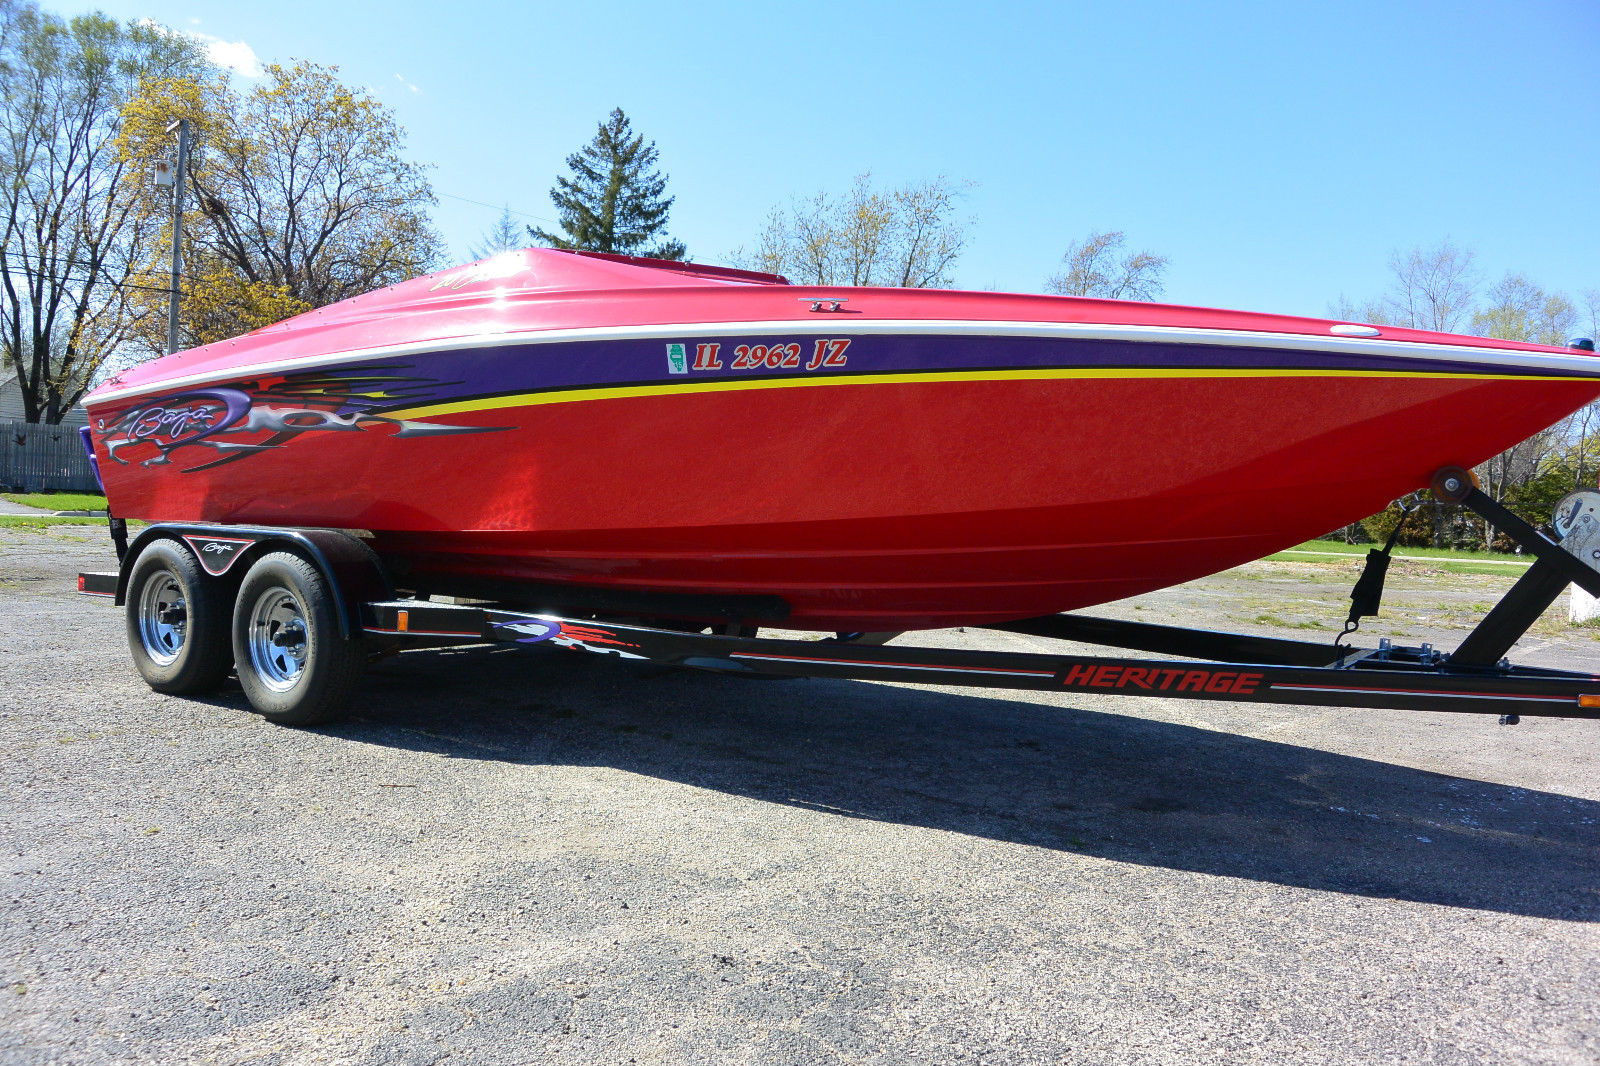 Baja Outlaw 20 boat for sale from USA